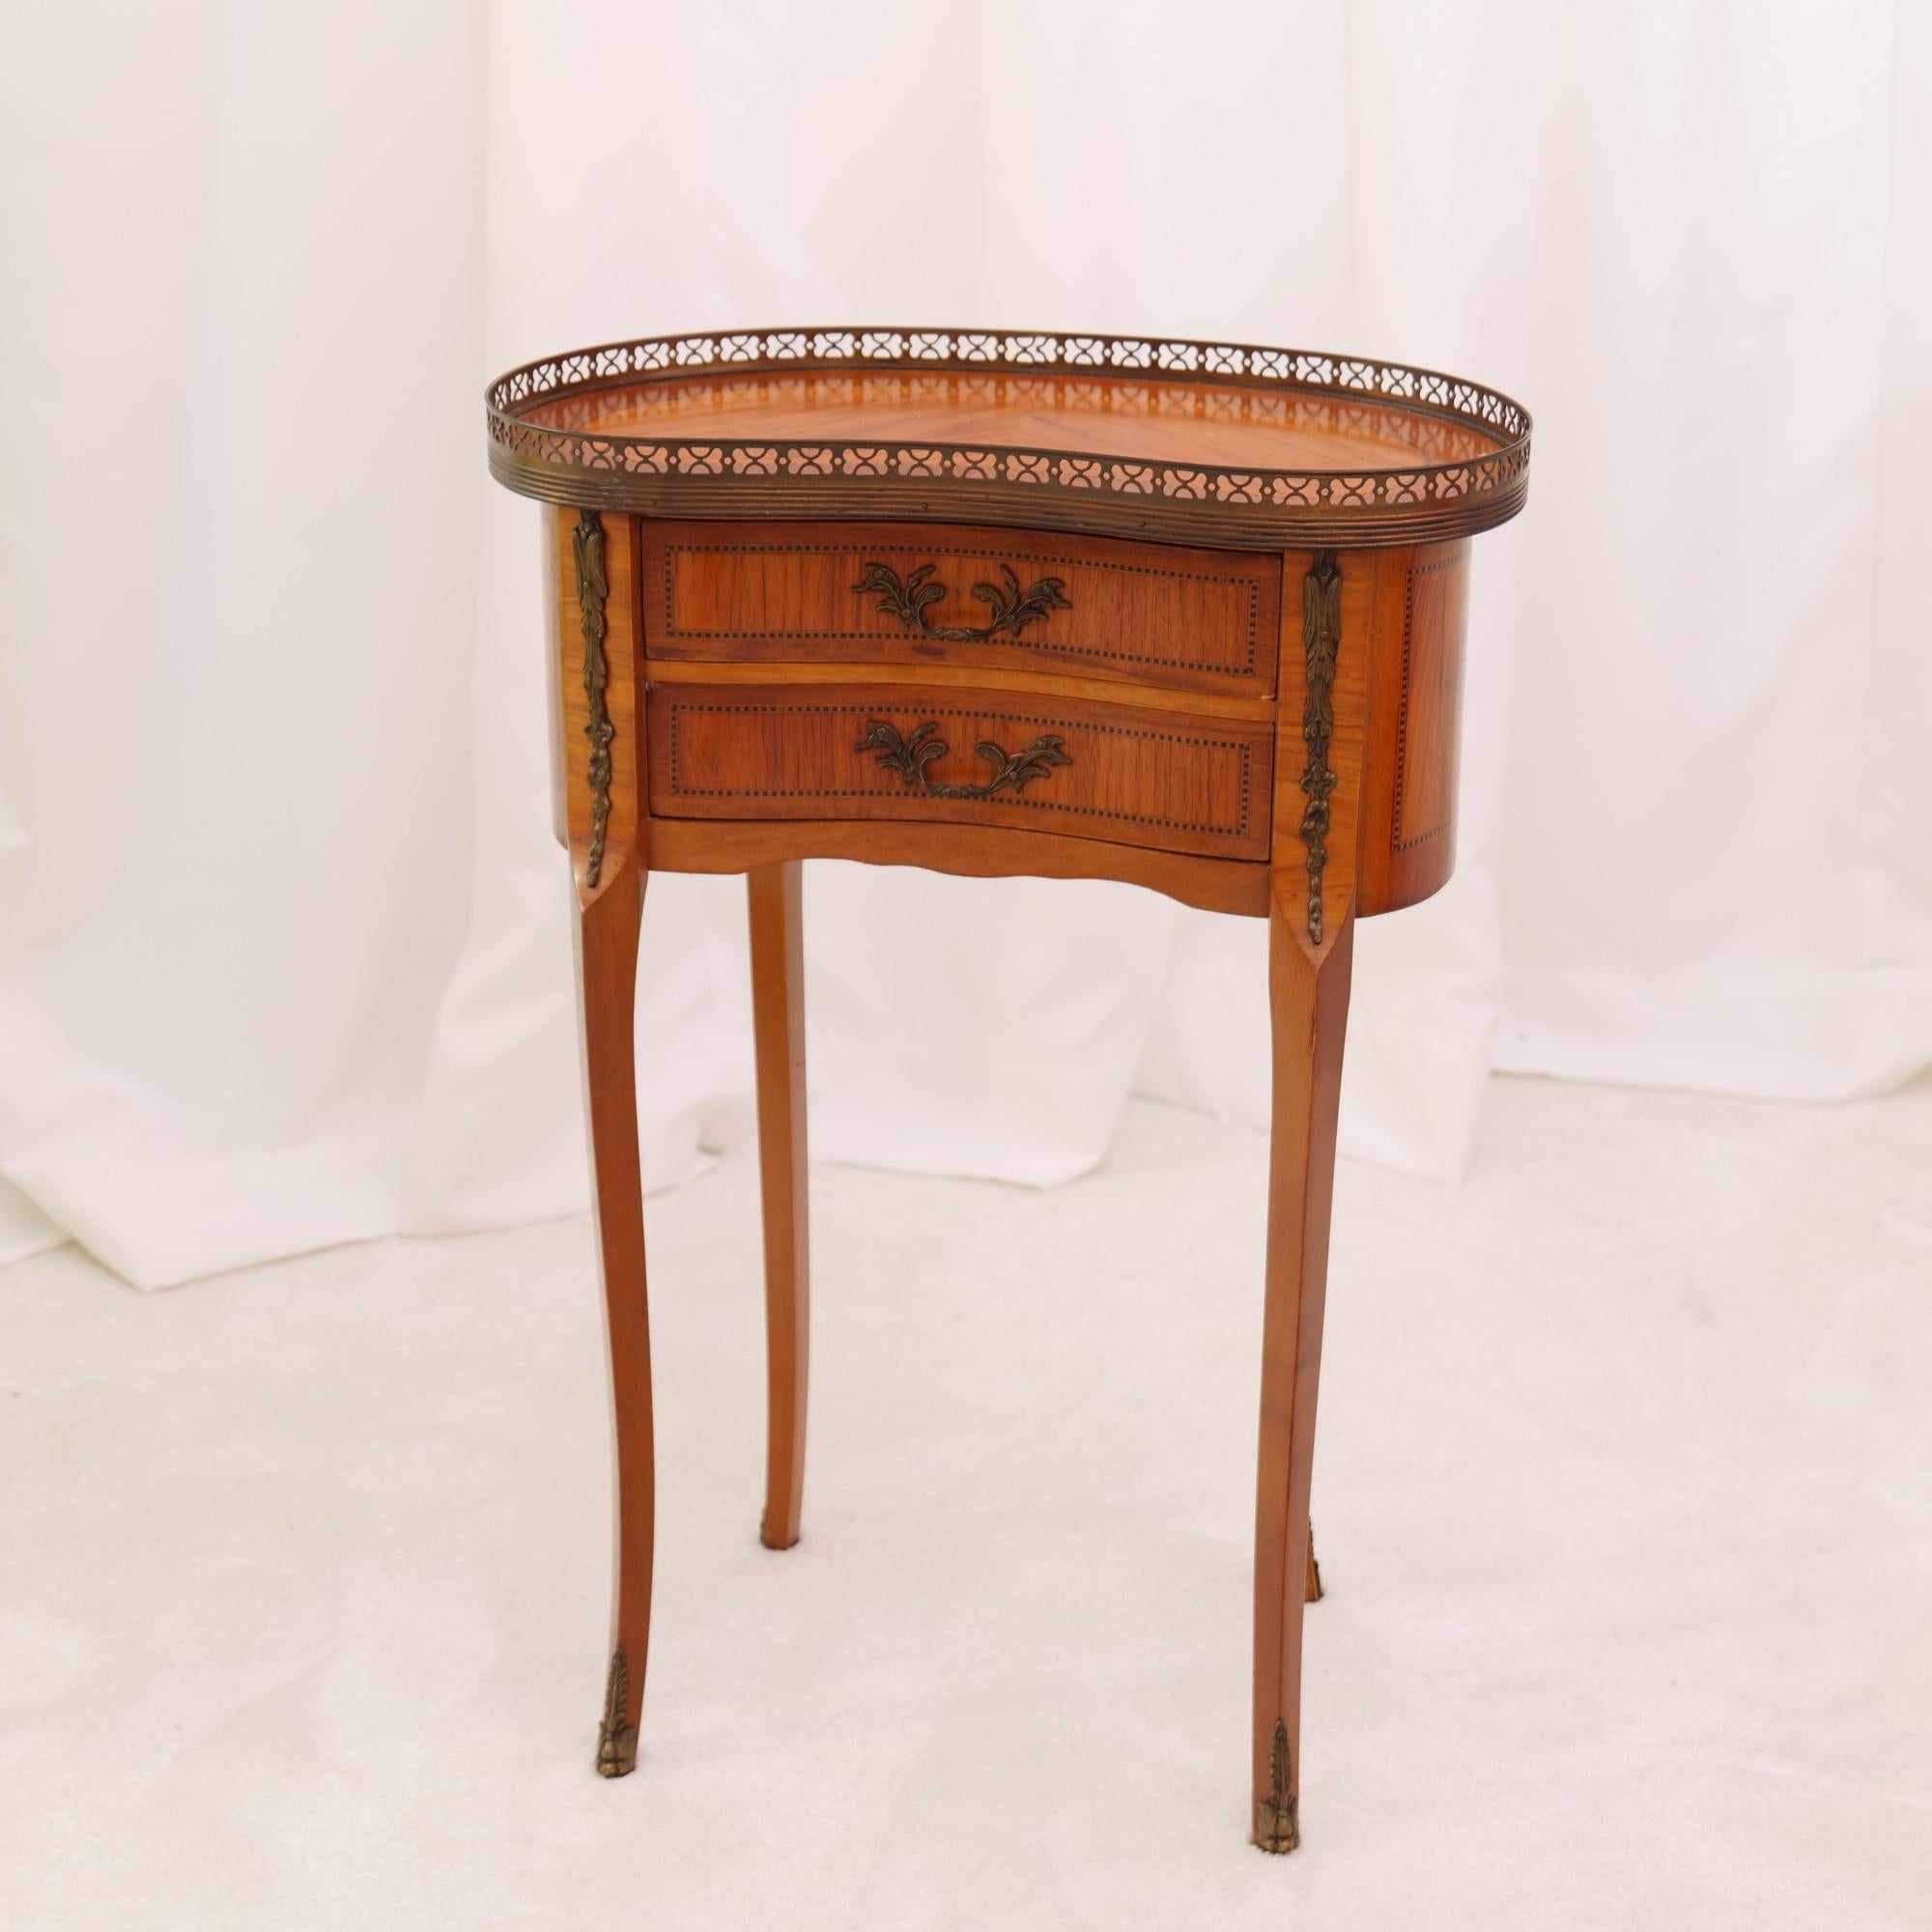 Vintage french side tables in style of Louis XV

very good condition with slight signs of use and patina.
approx - 1960s